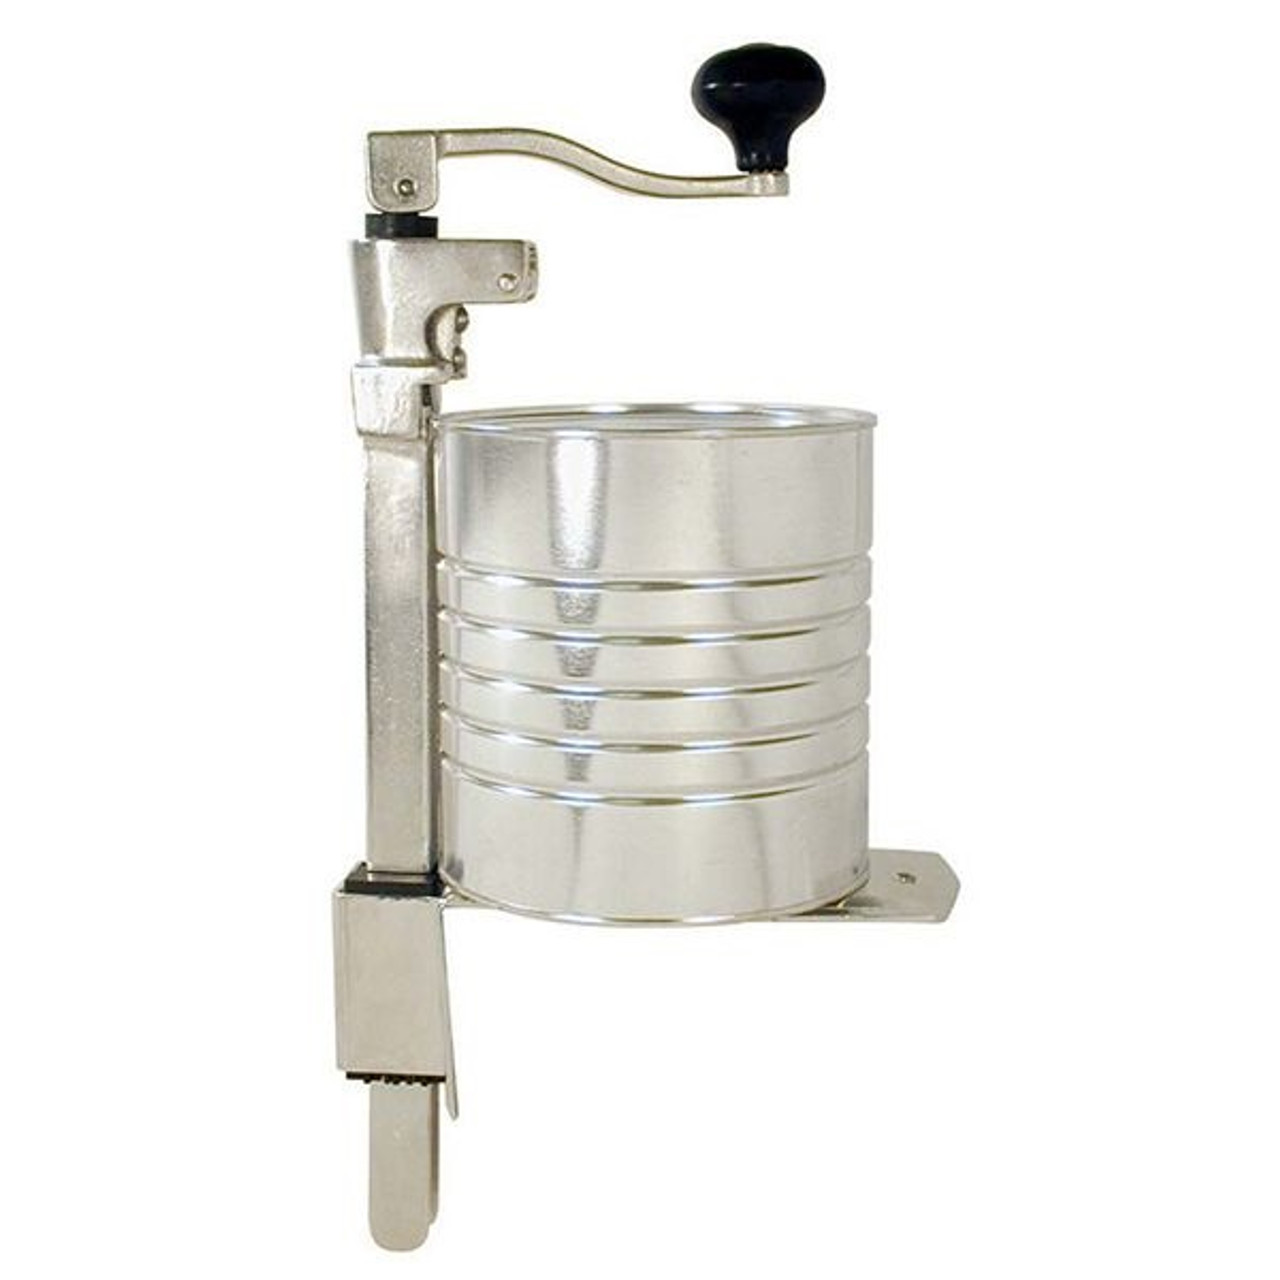 Thunder Group IRTC014 14 Heavy-Duty Table-Mounted Can Opener